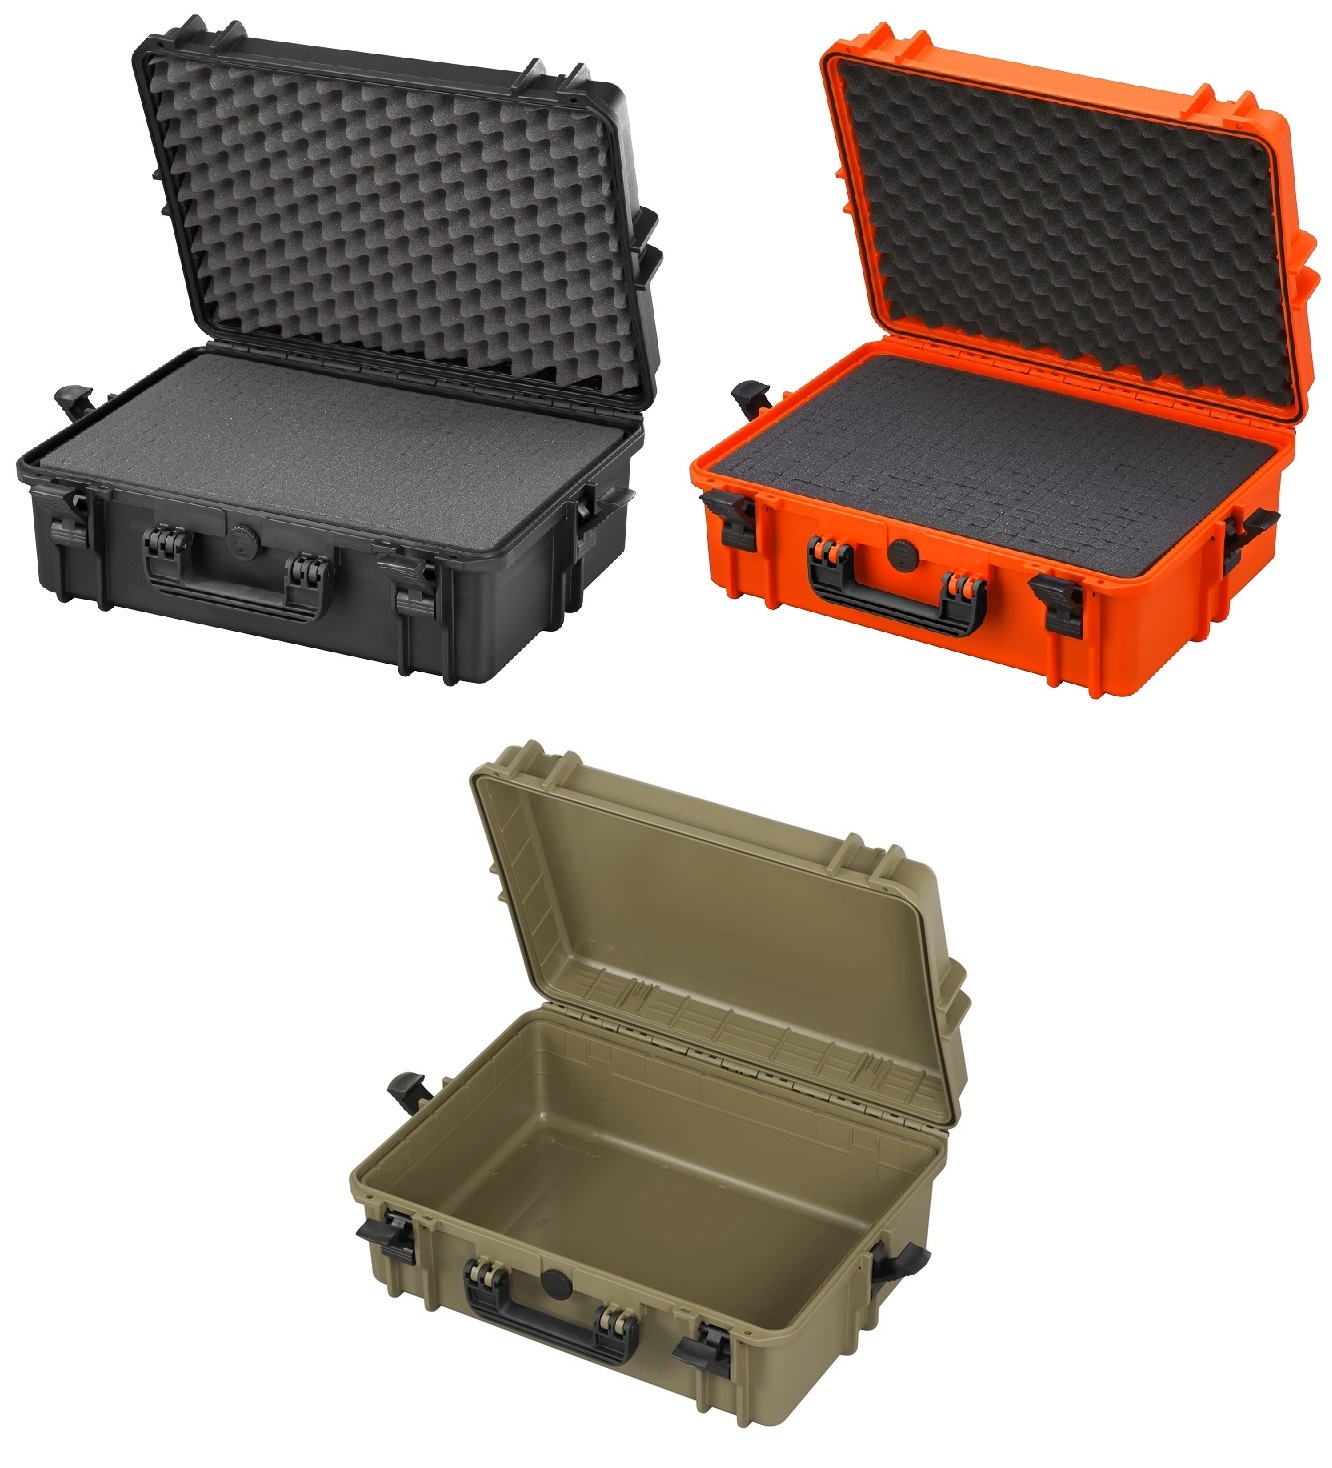 34 Litre IP67 Rated Waterproof Protective Case - With or Without Foam